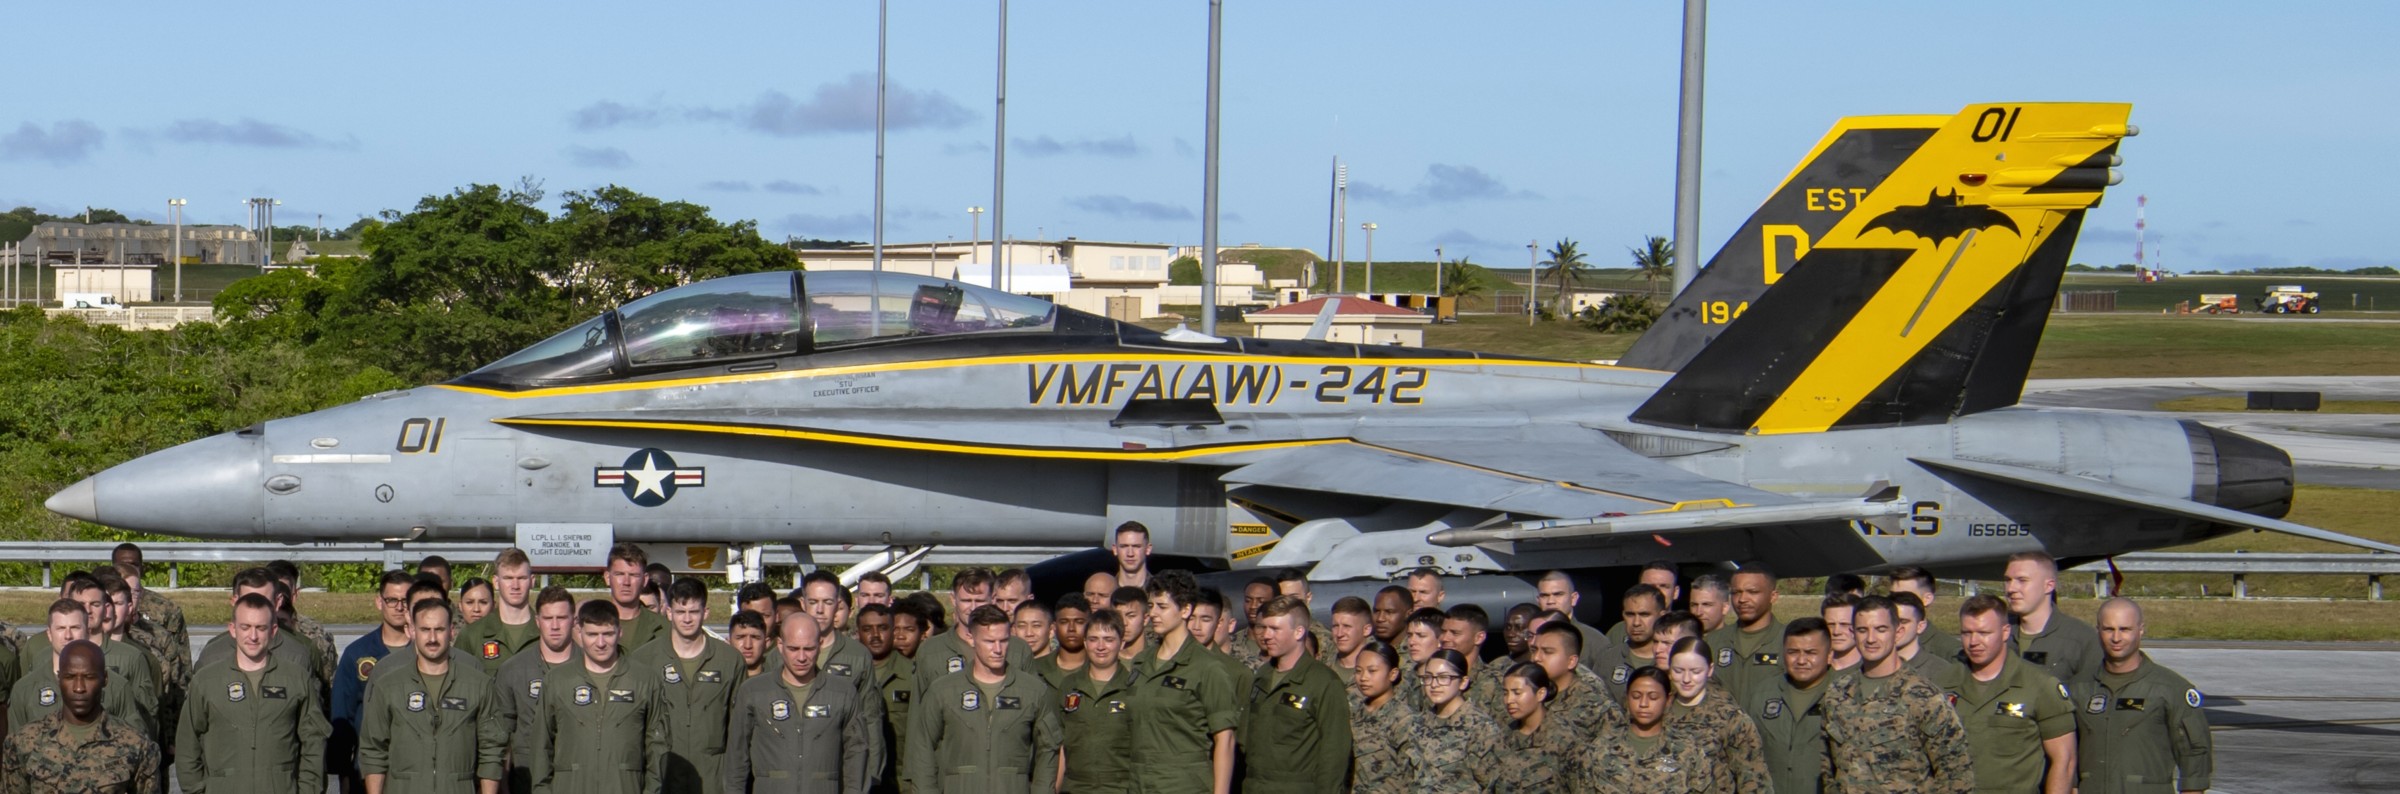 vmfa(aw)-242 bats marine all-weather fighter attack squadron usmc f/a-18d hornet 106a andersen afb